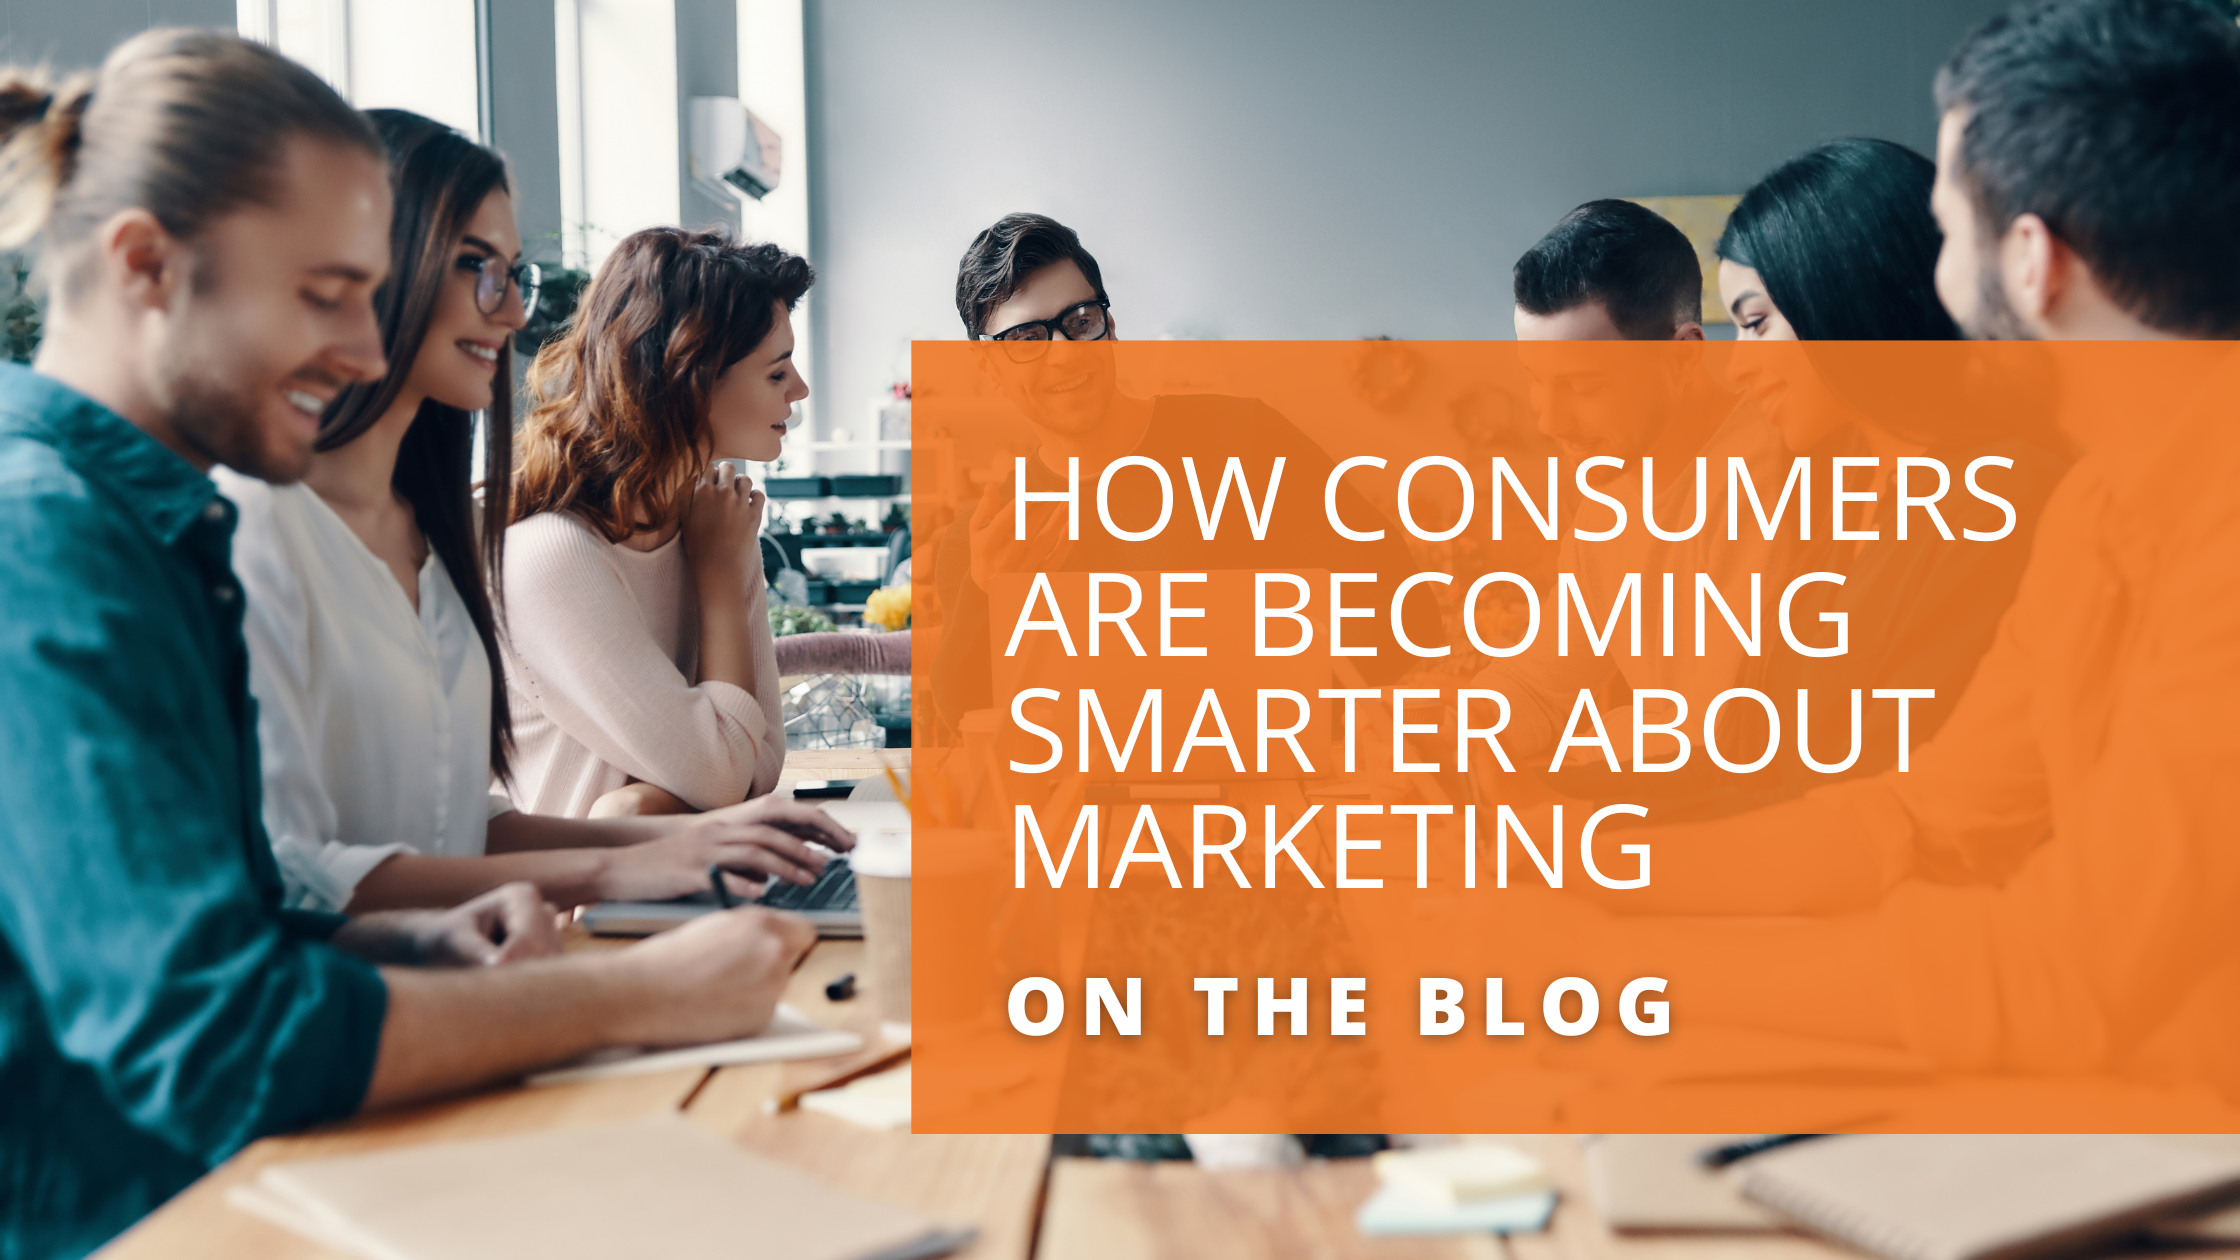 How Consumers are Becoming Smarter About Marketing